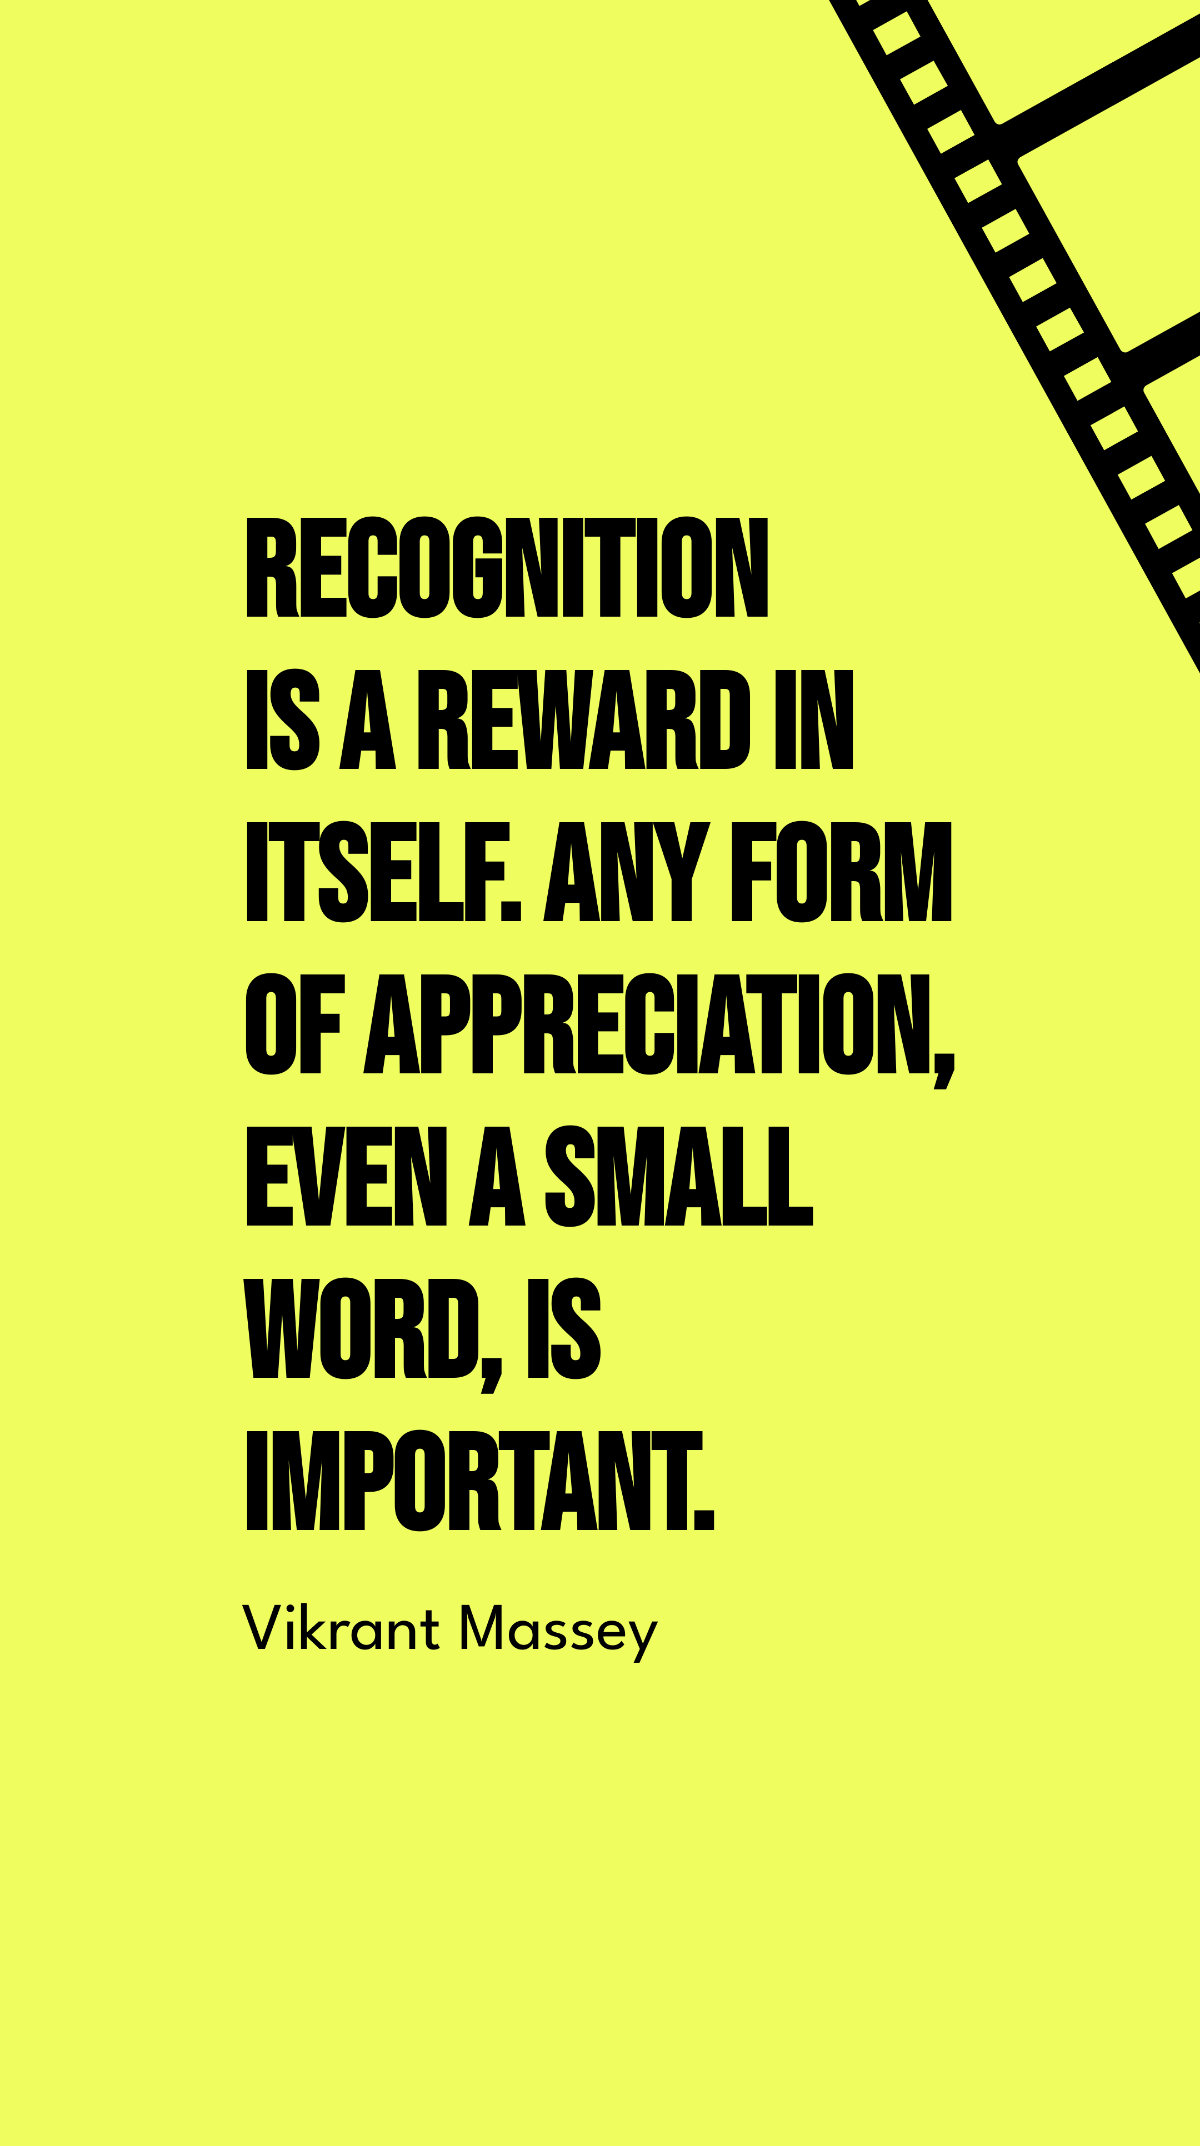 Free Vikrant Massey - Recognition is a reward in itself. Any form of appreciation, even a small word, is important. Template